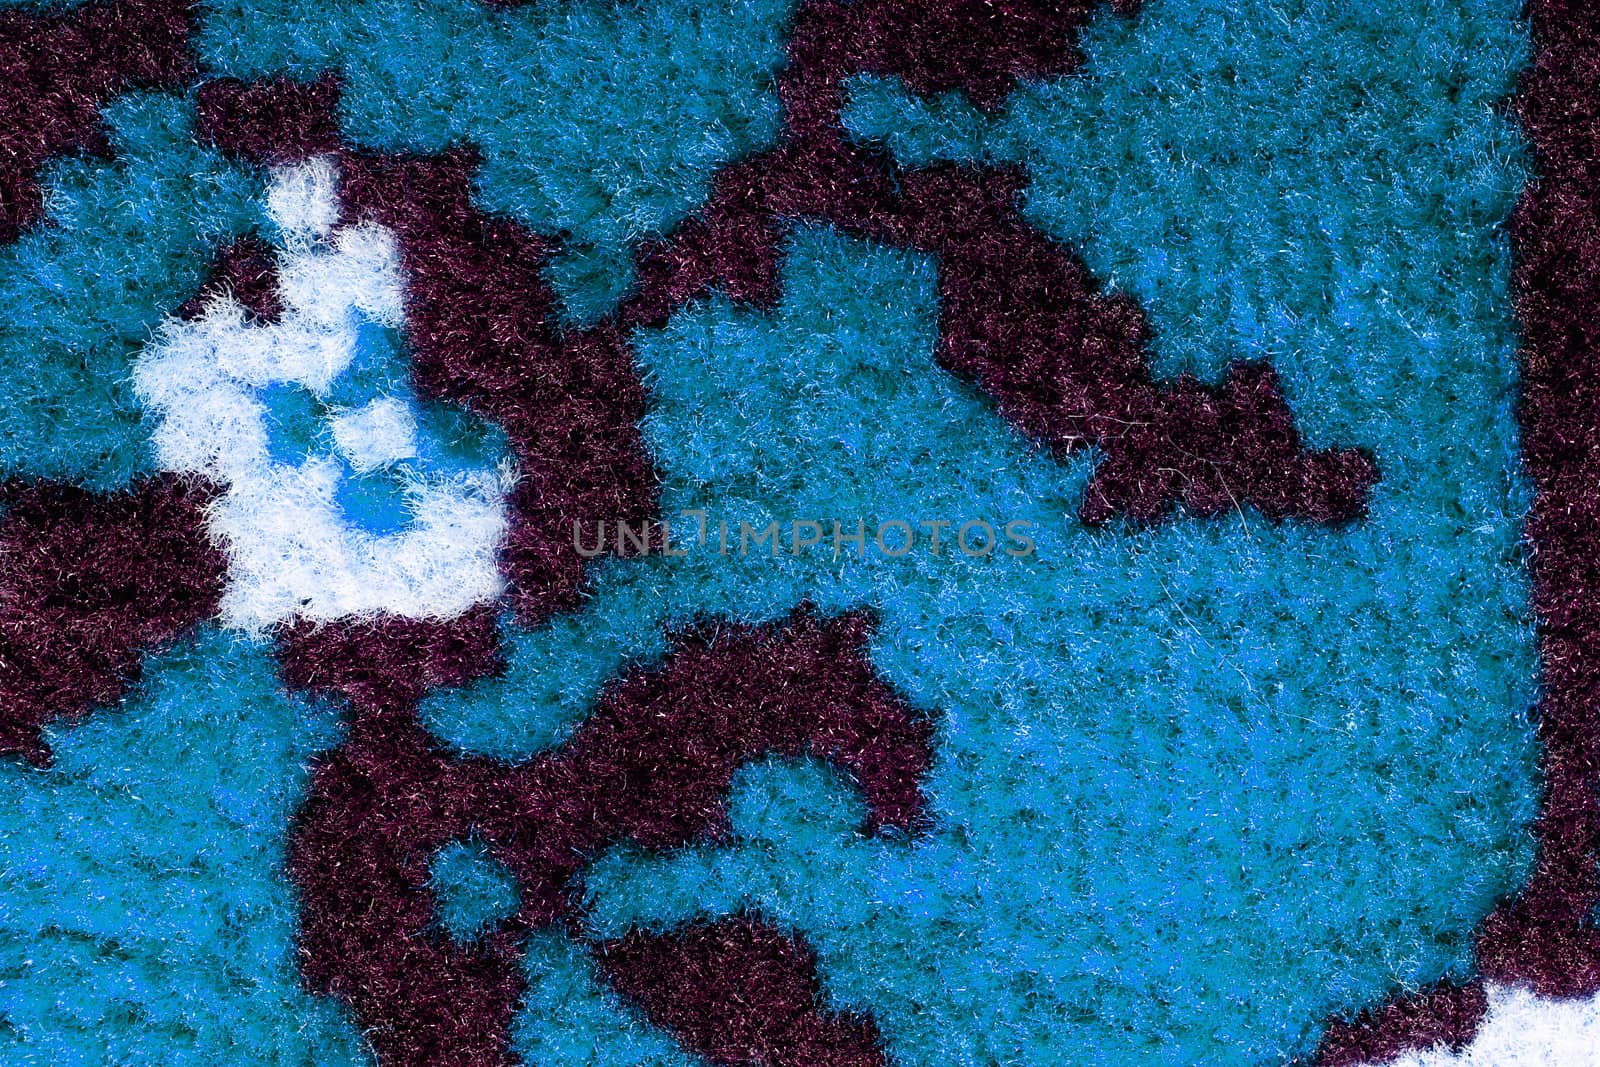 Hand woven carpet pattern, close up view by sfinks